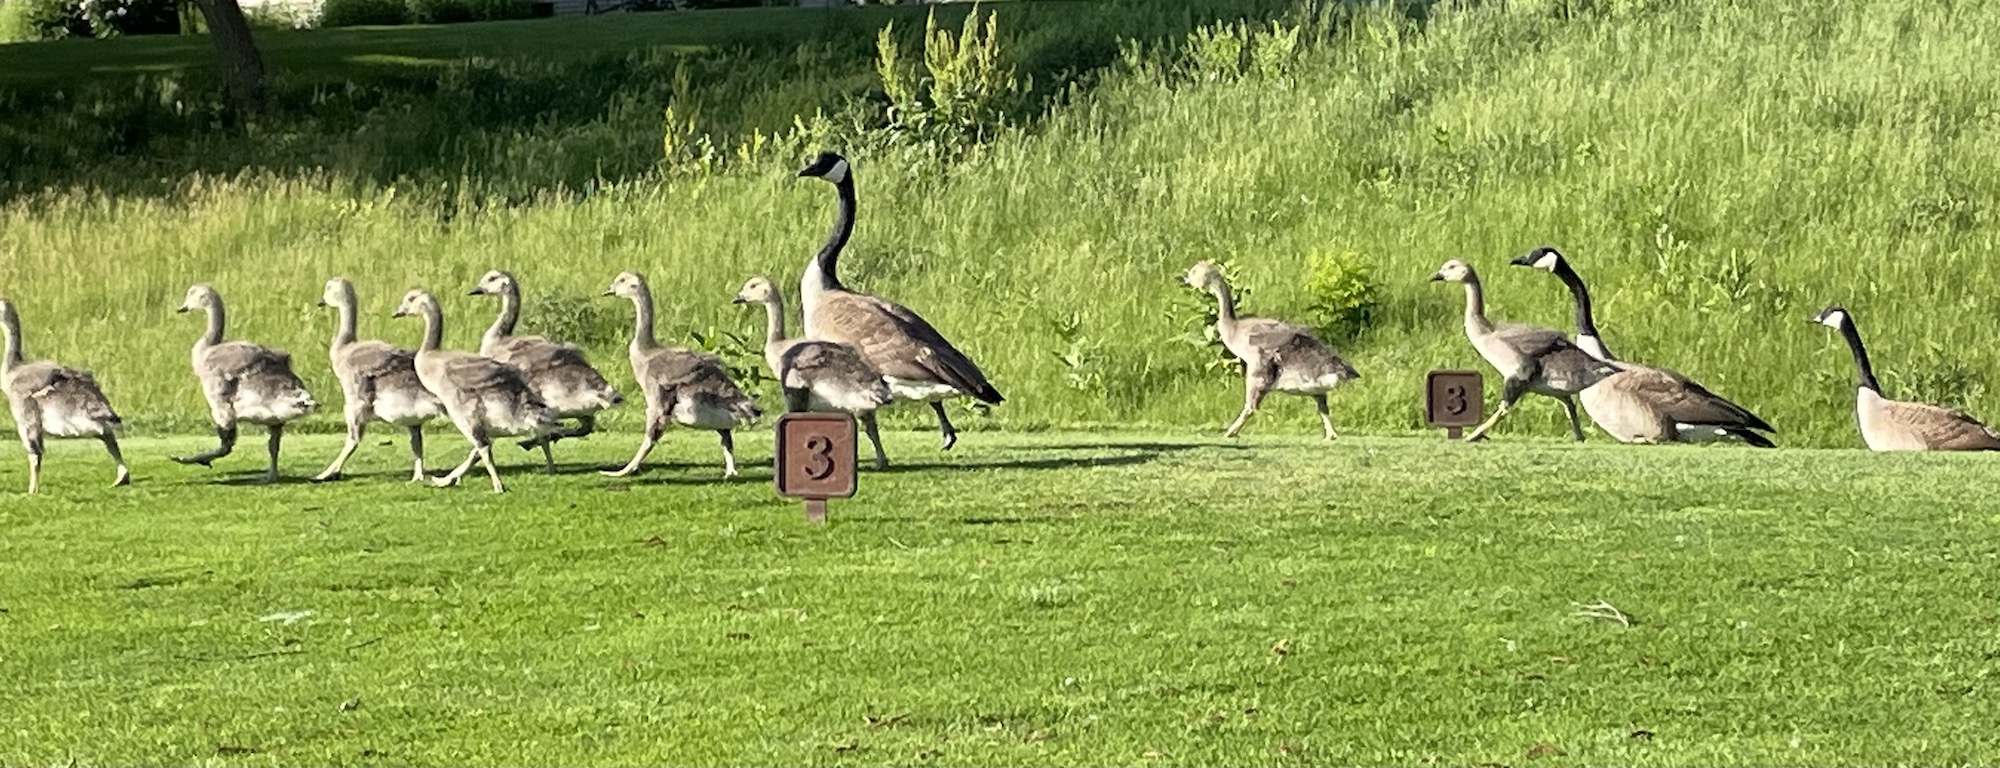 Parade of Geese